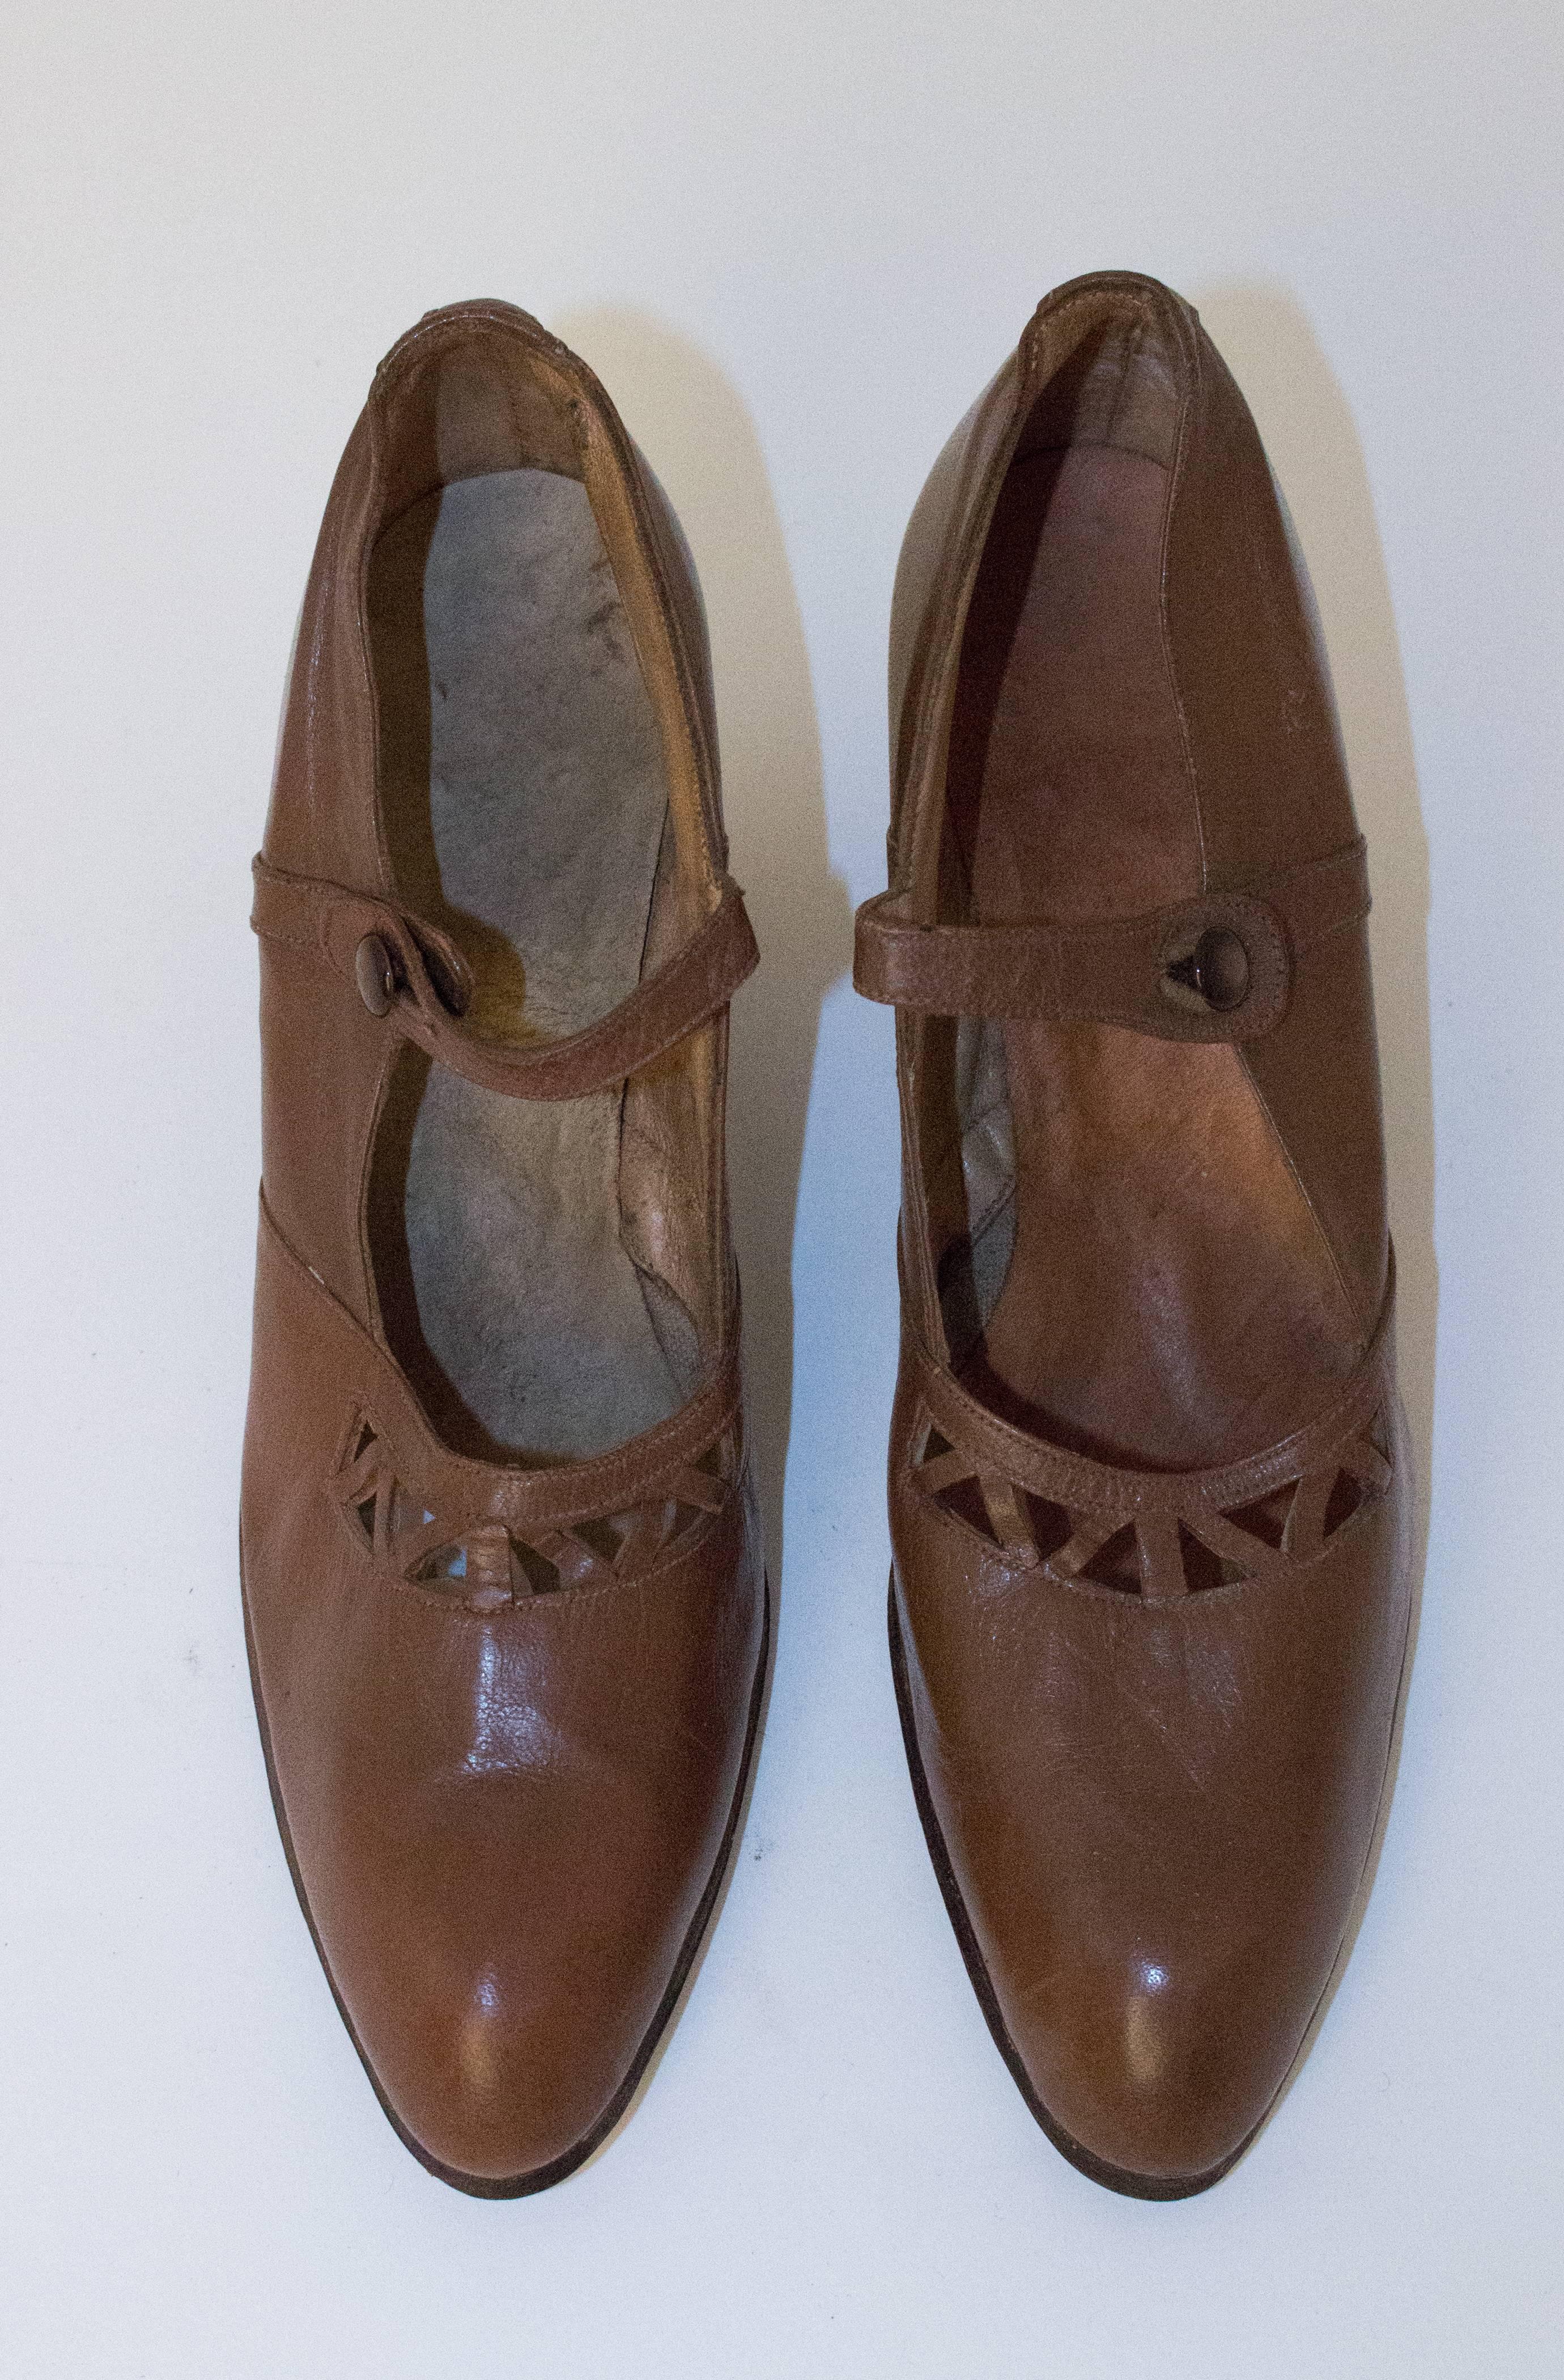 20s chocolate brown cutout heels. Measures 9 1/2 inches from toe to heel.